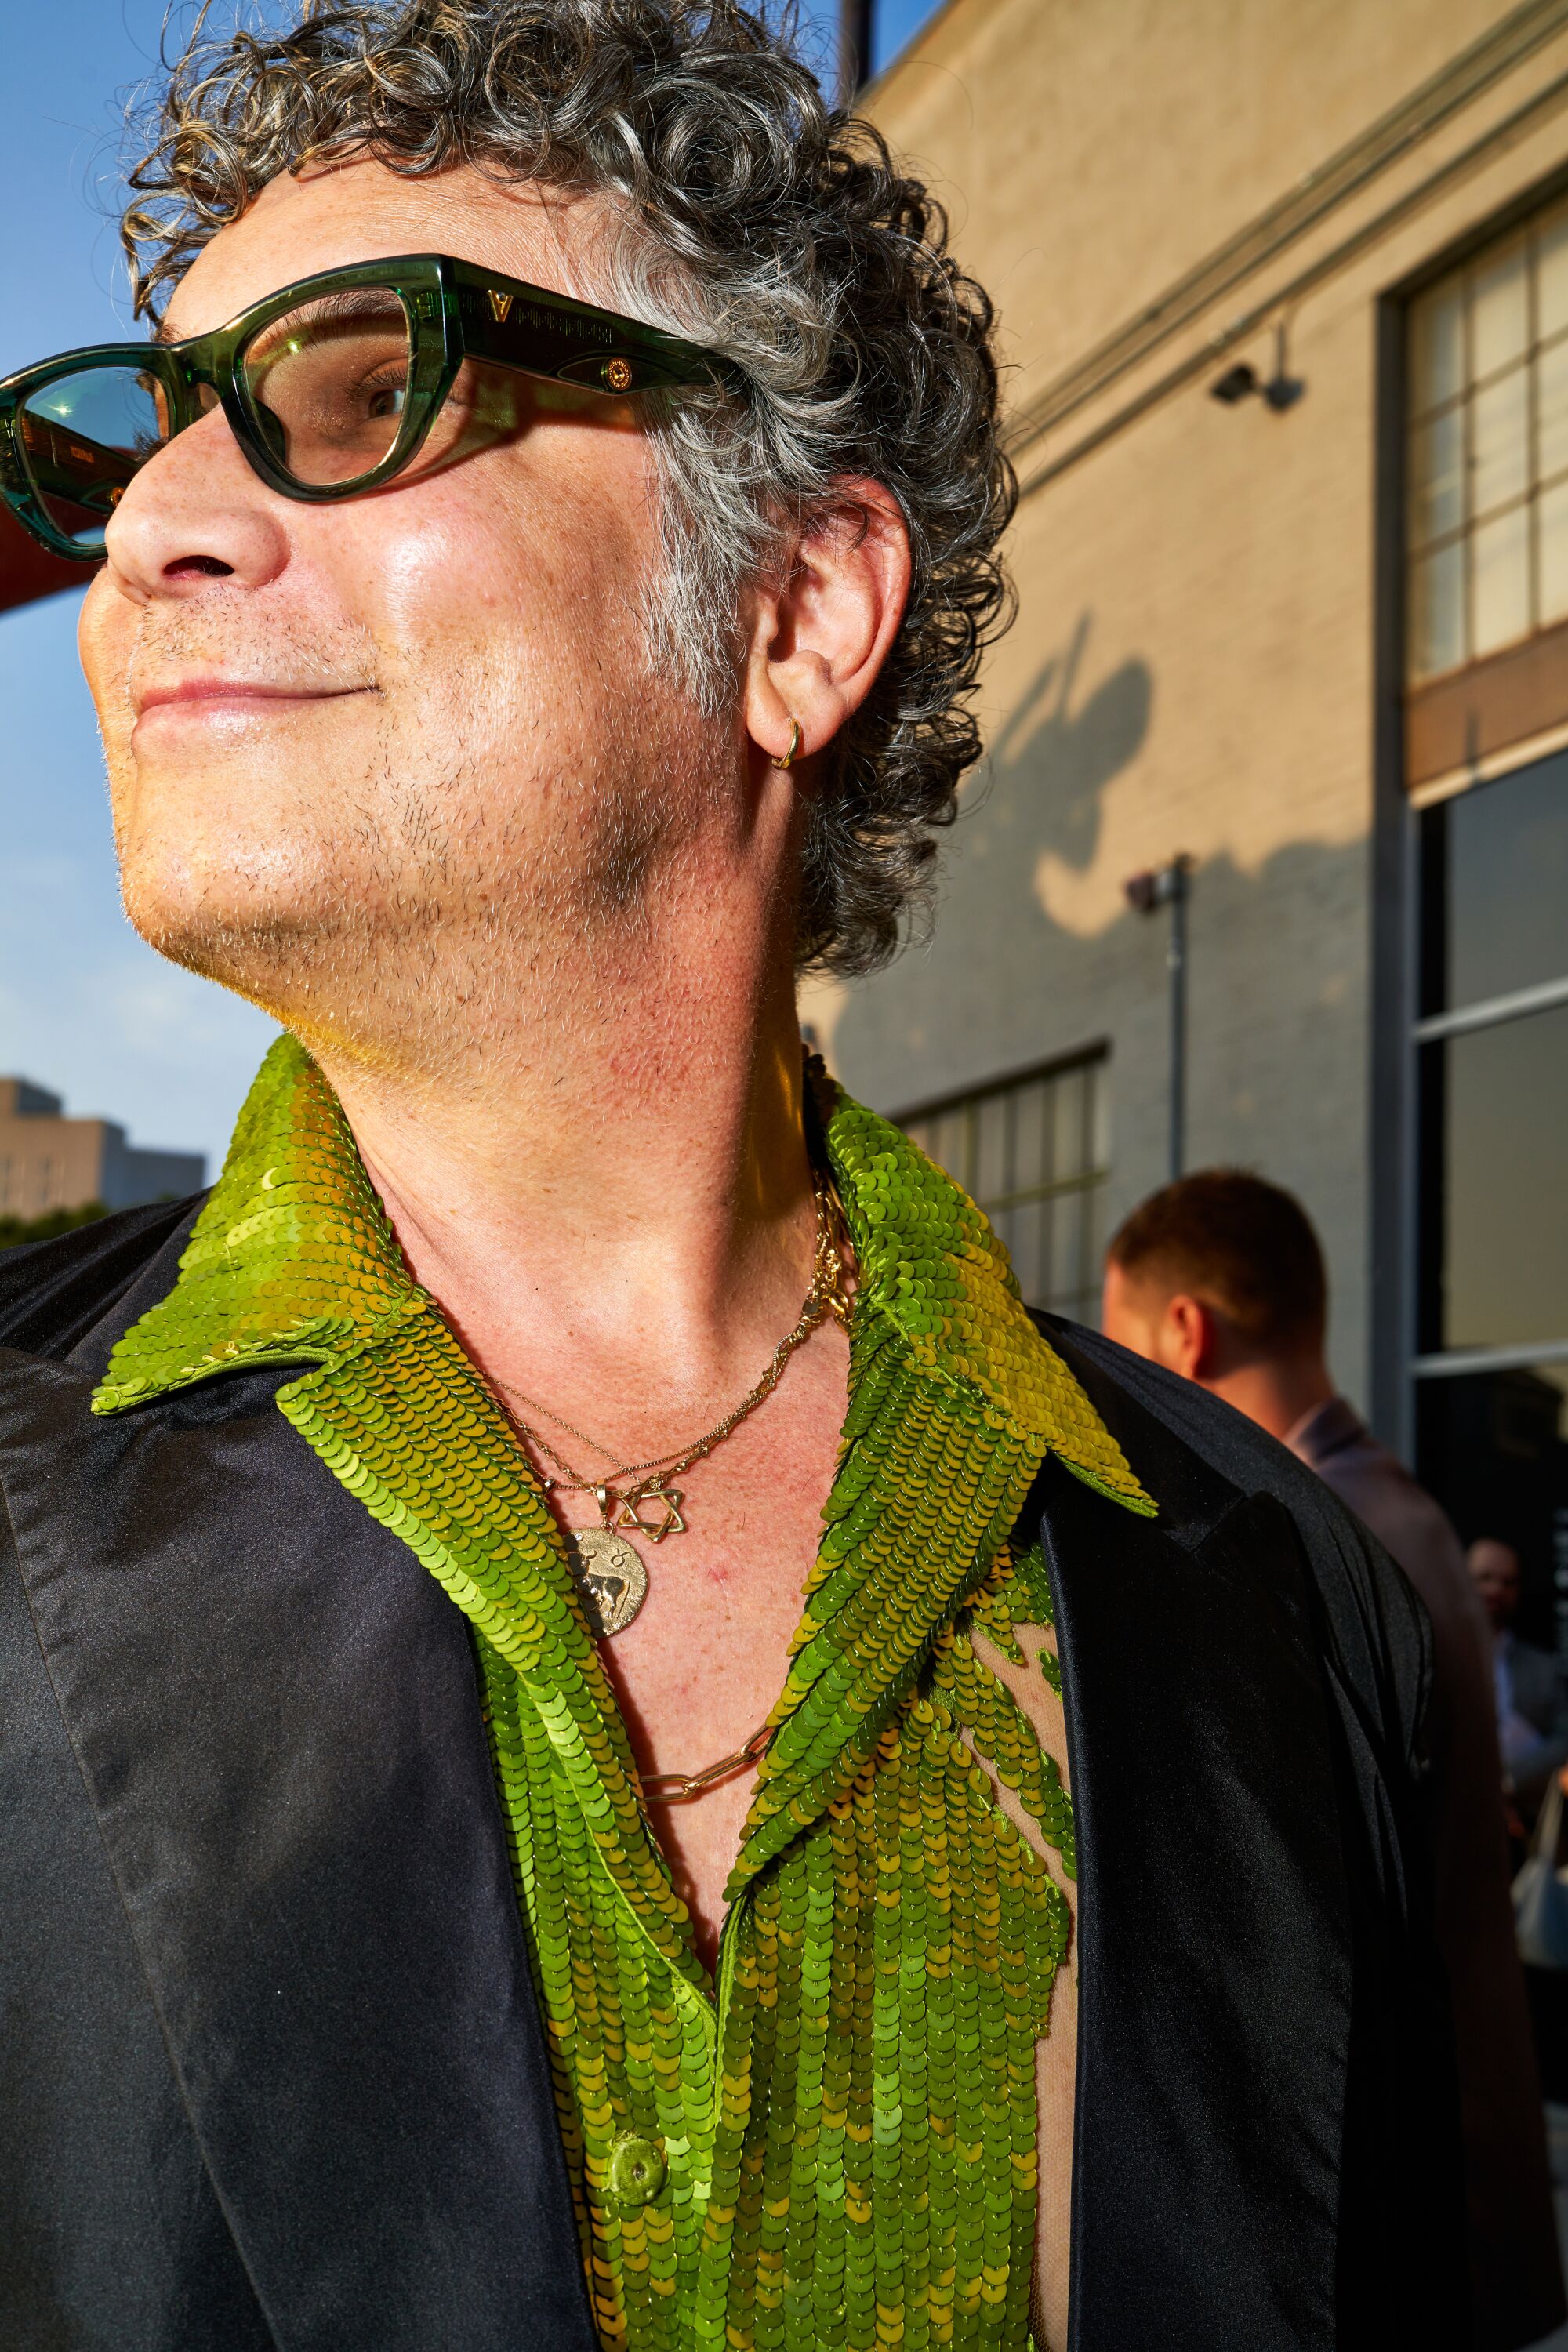 A man in glasses wearing a sparkling green shirt.